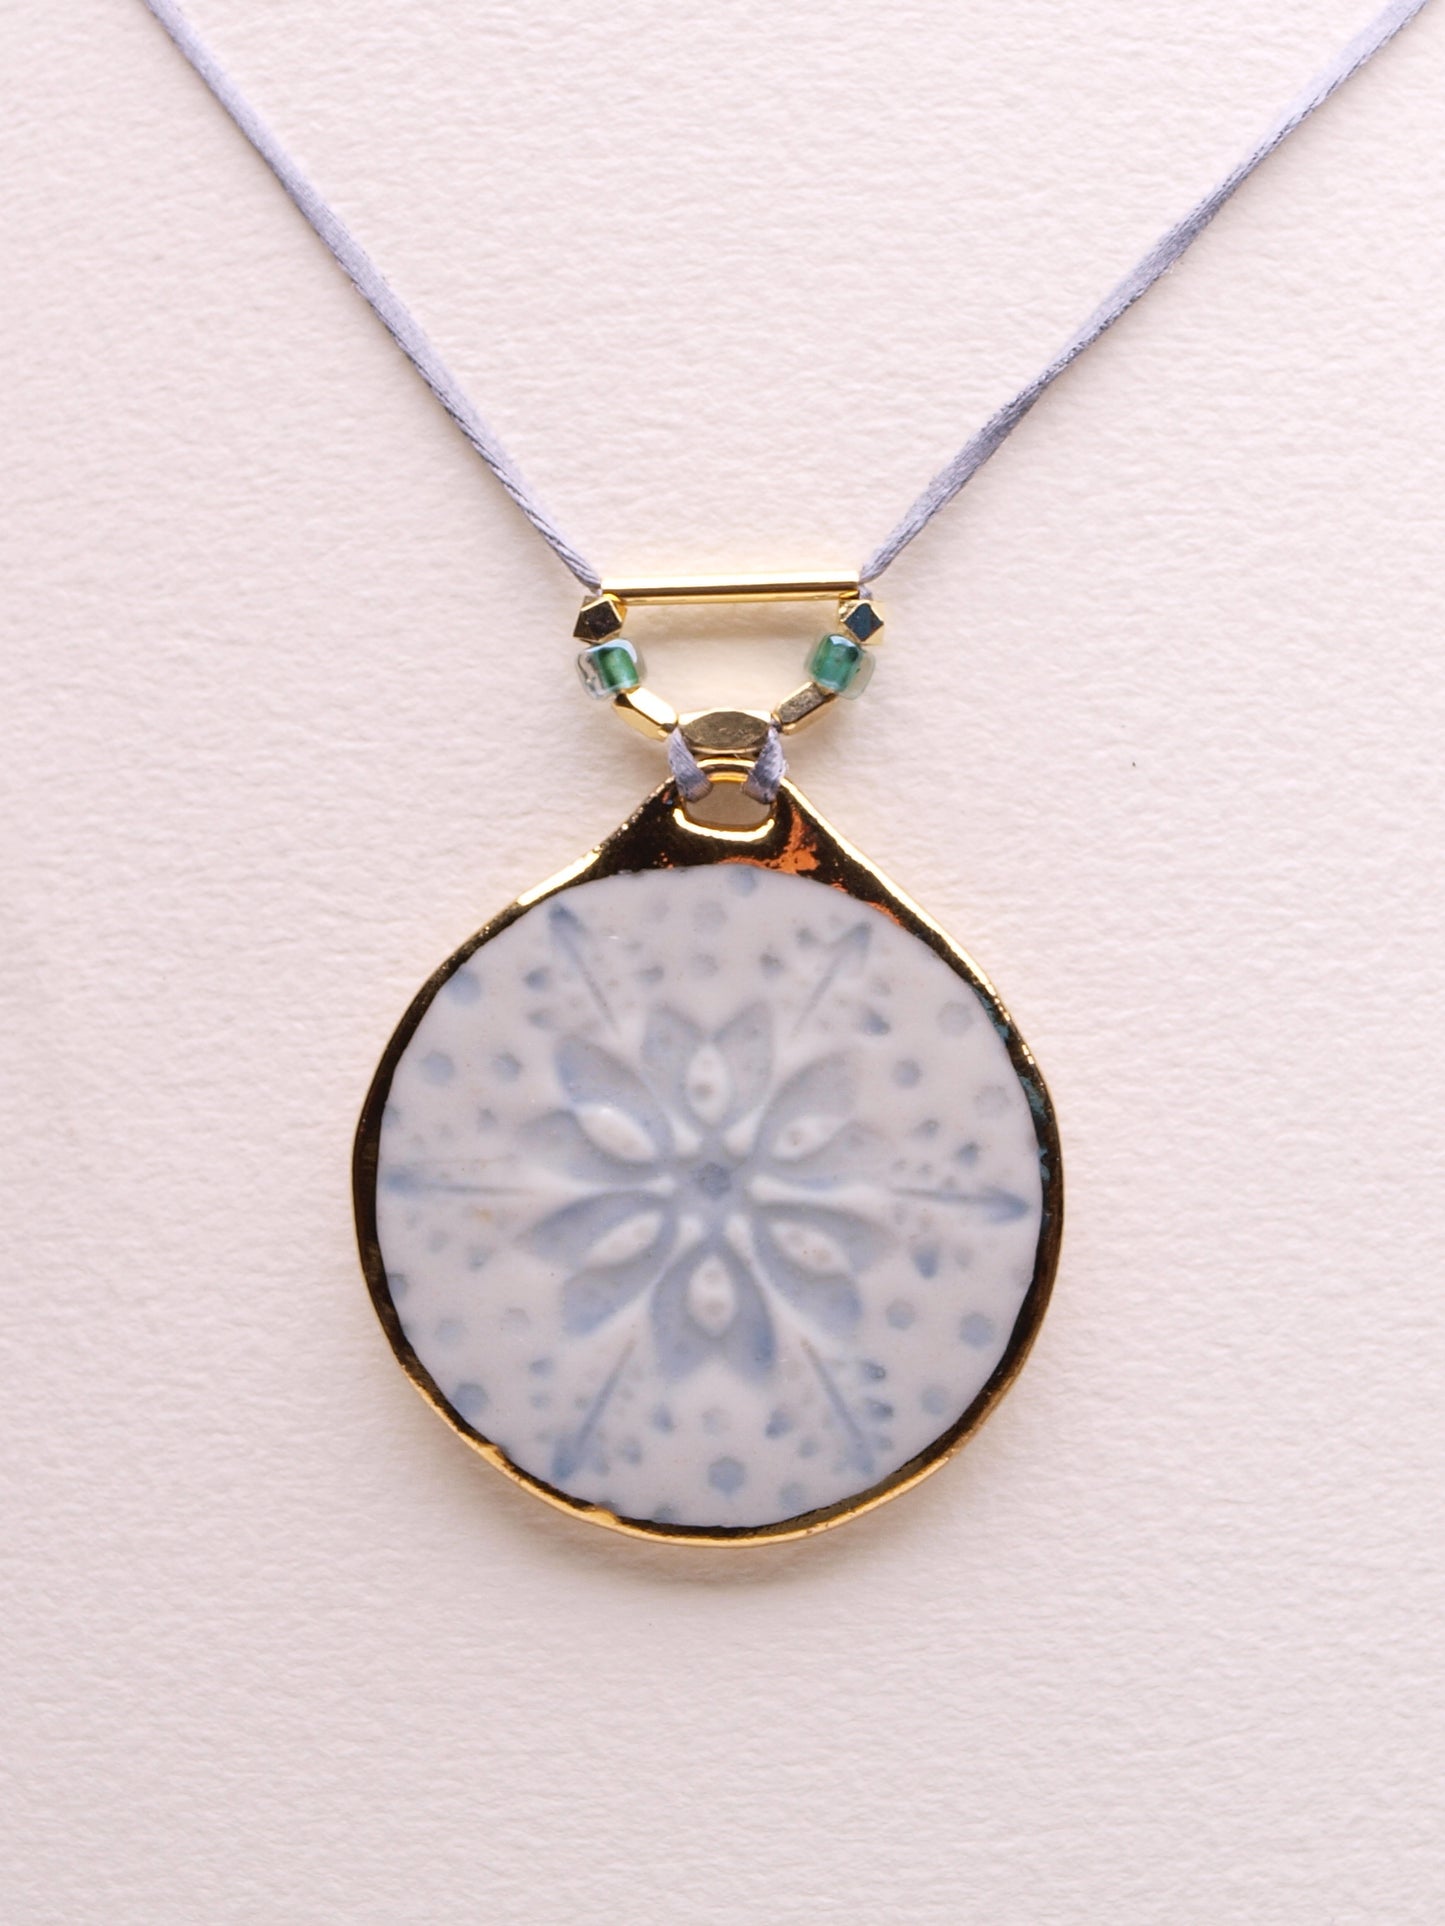 Elegant Snowflake Pendant Necklace with 24k Gold Luster - Winter Charm and Chic type #4 1.8" dia.